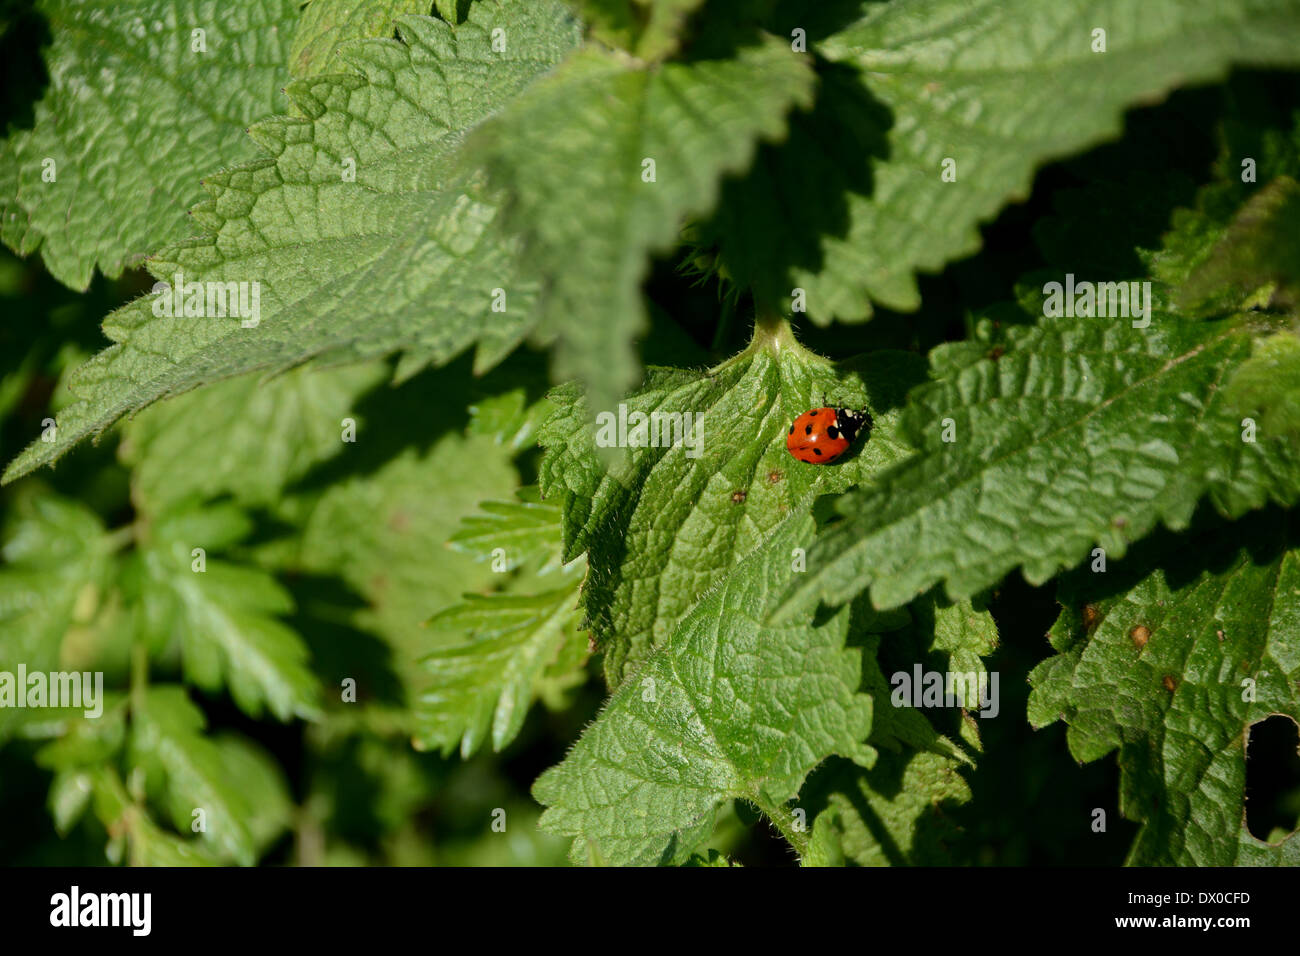 Seven-spot ladybug hidden in a patch of stinging nettles Stock Photo